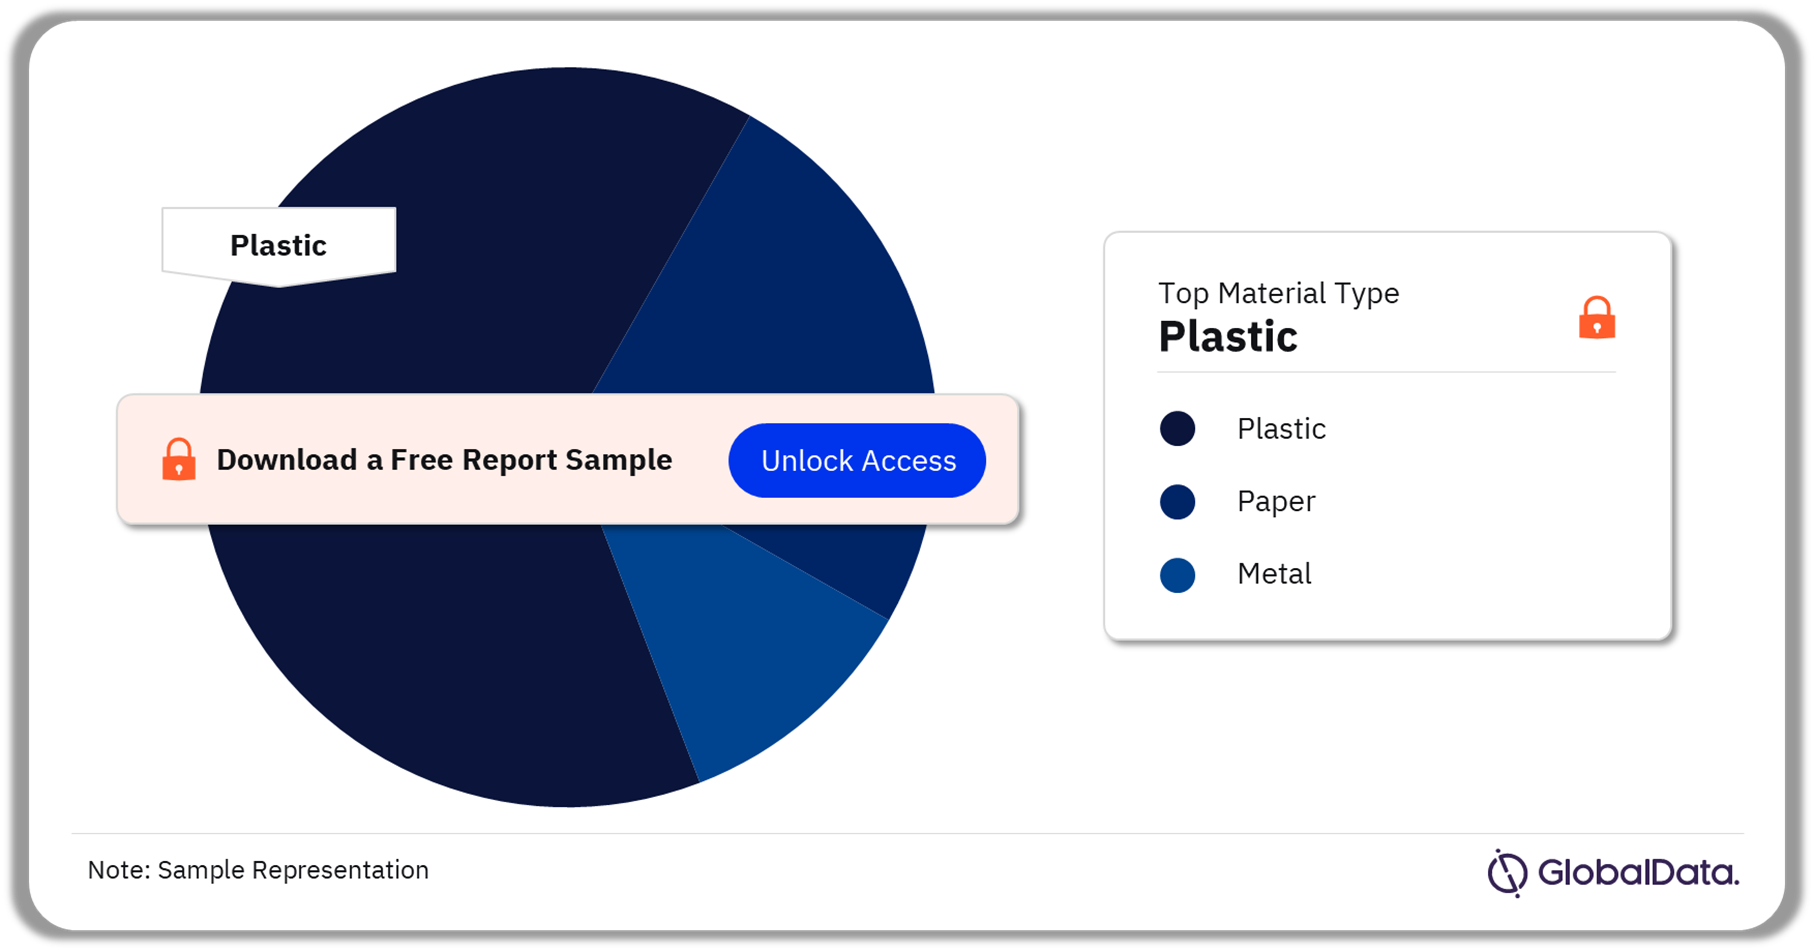 Flexible Packaging Market Analysis by Material Type, 2023 (%)